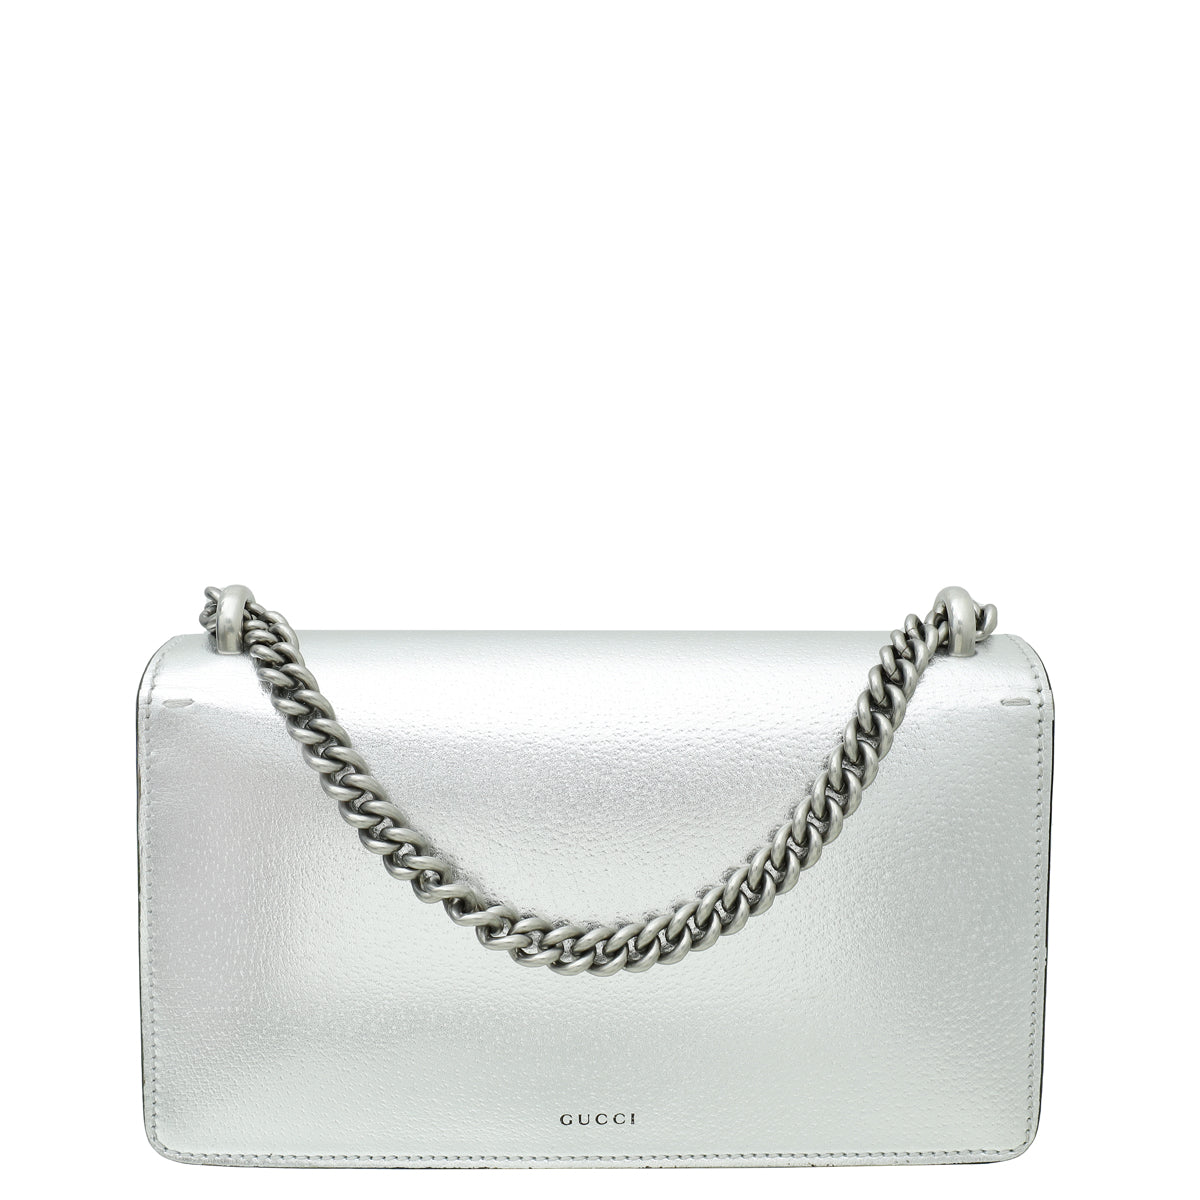 Gucci Metallic Silver Dionysus Leather Small Shoulder Bag